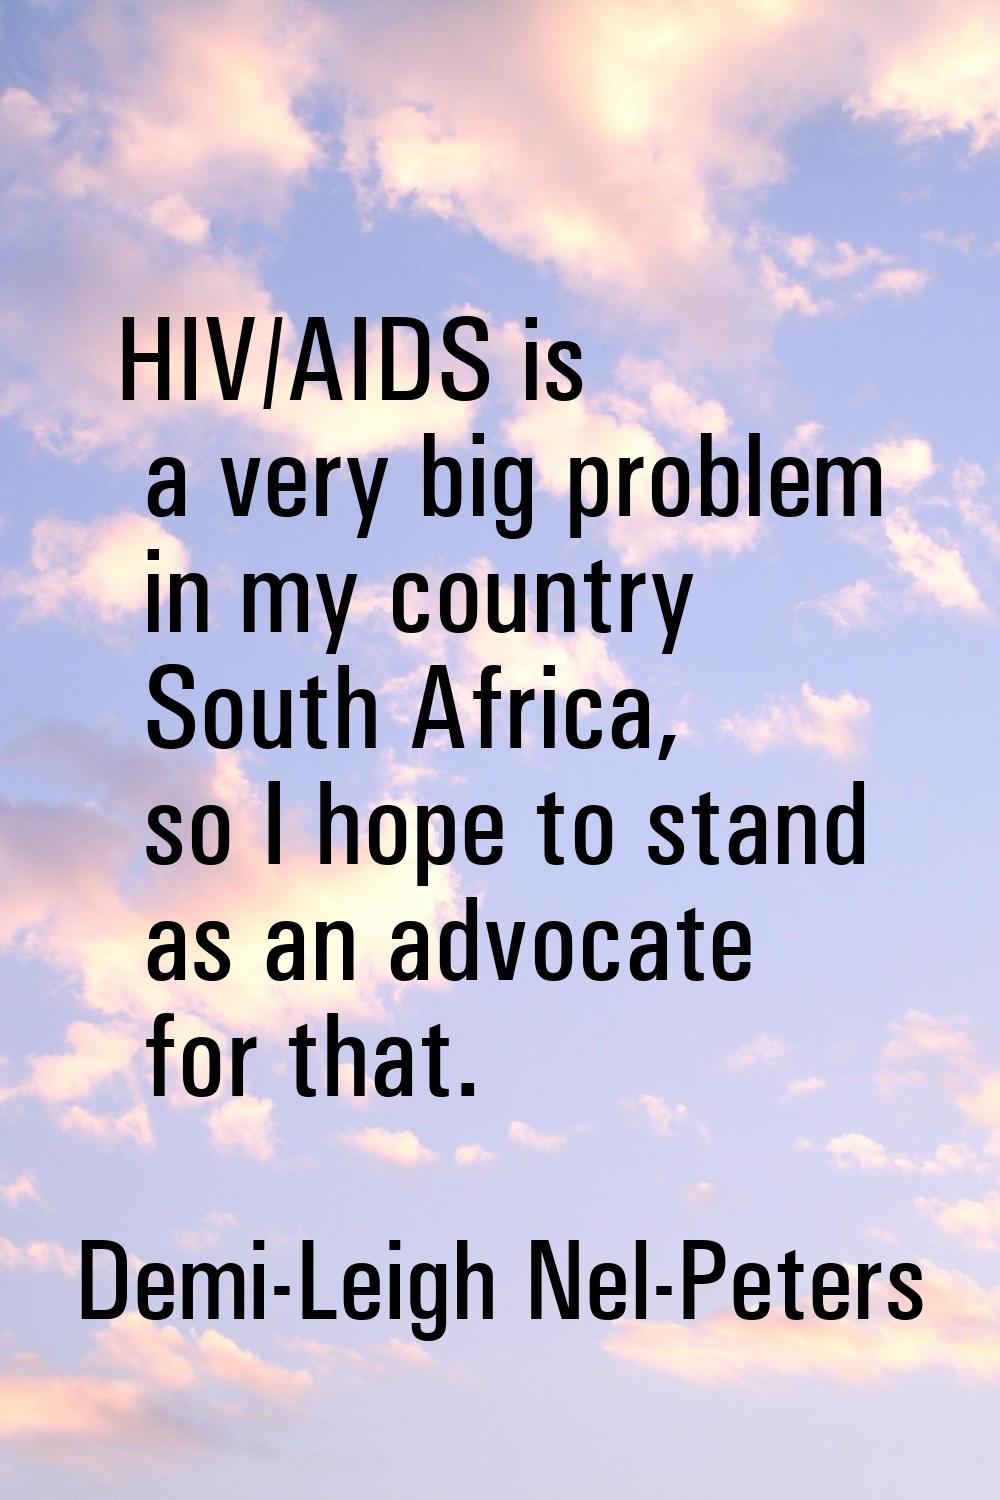 HIV/AIDS is a very big problem in my country South Africa, so I hope to stand as an advocate for th